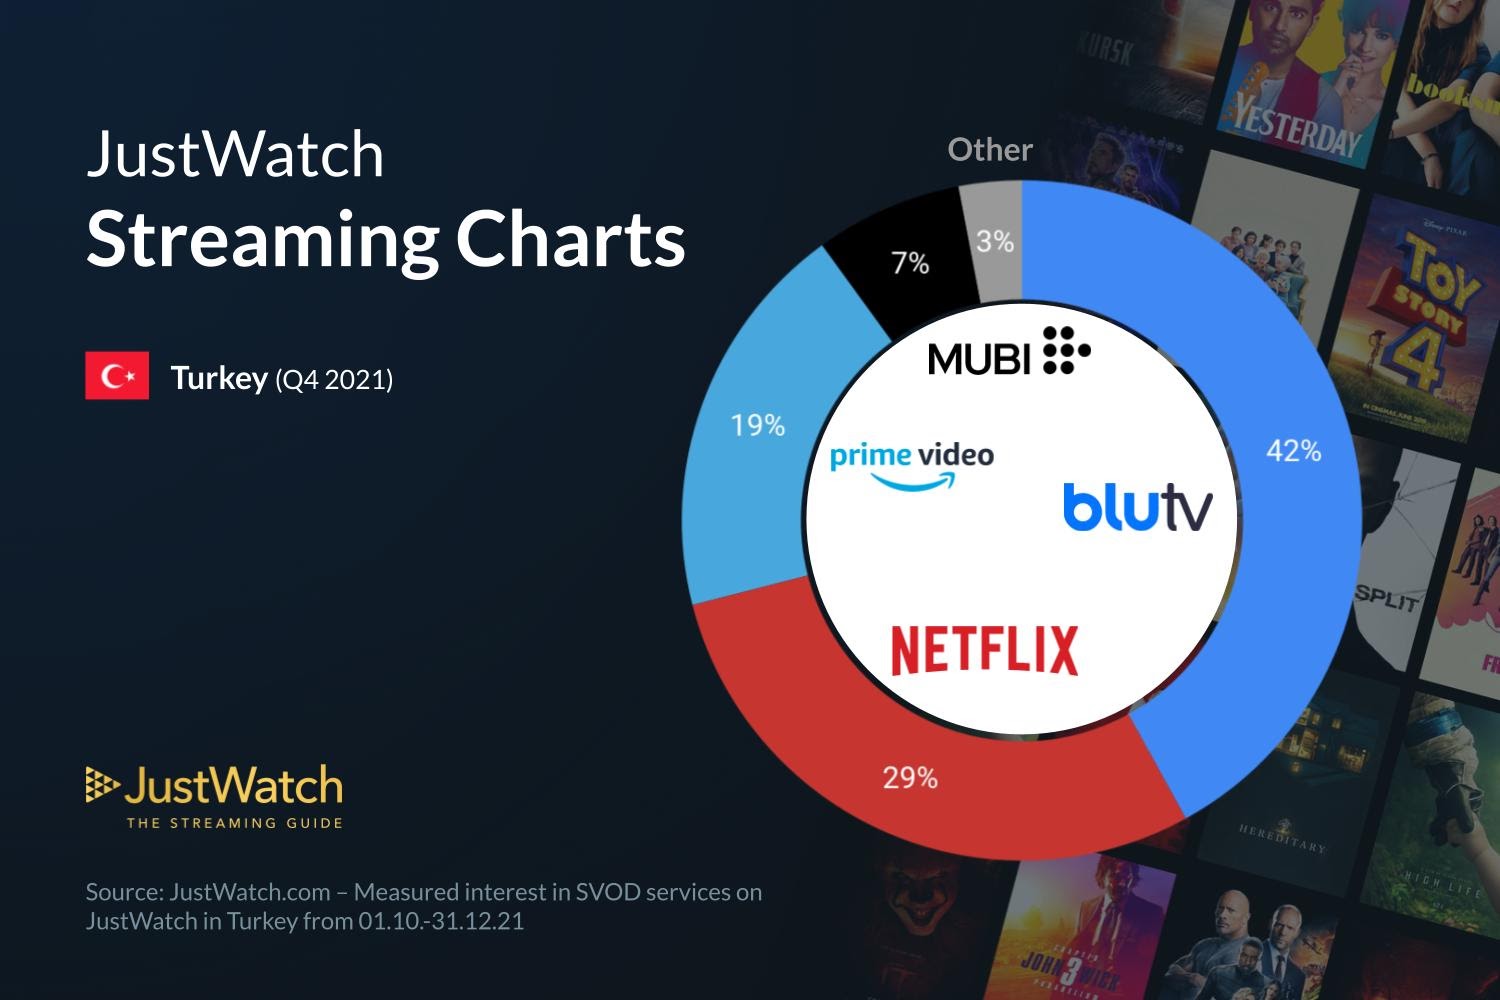 Q4-Streaming-services-marketshare-infographic-2021-49